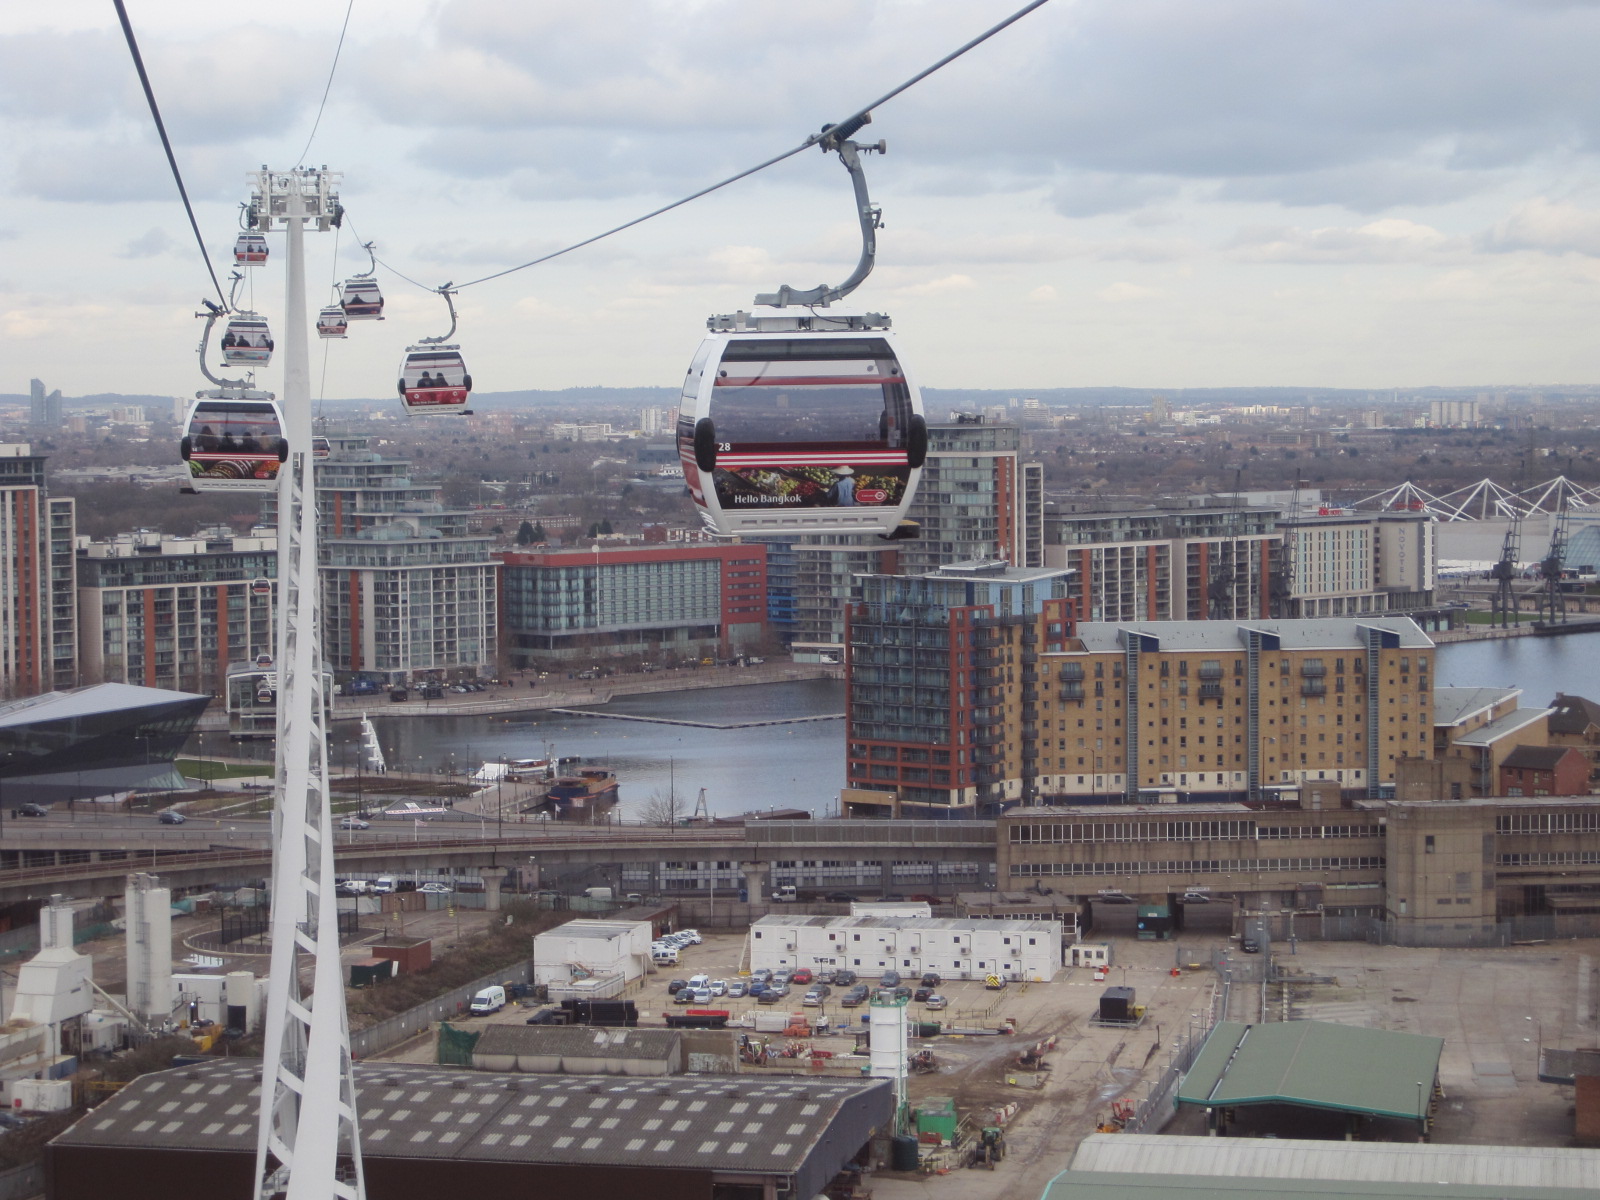 The Emirates Air Line - photo by Juliamaud